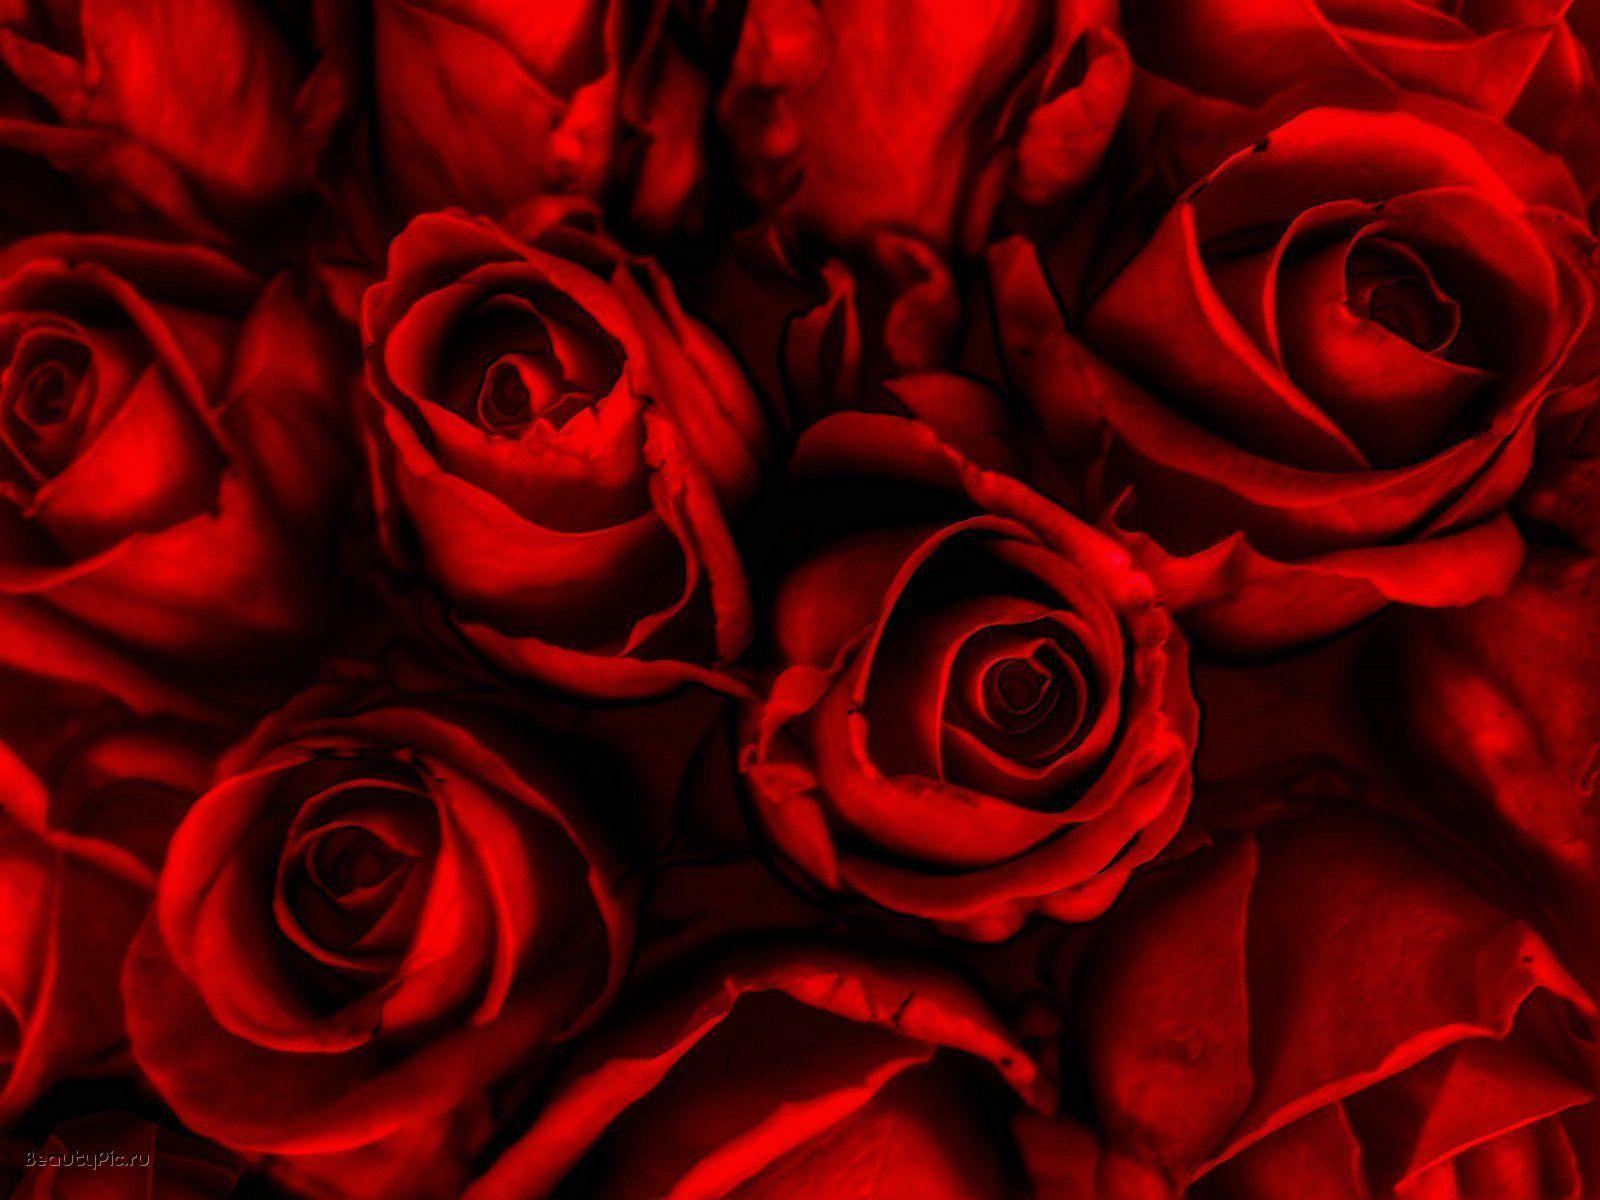 Red Roses Wallpaper Background. rose background download free